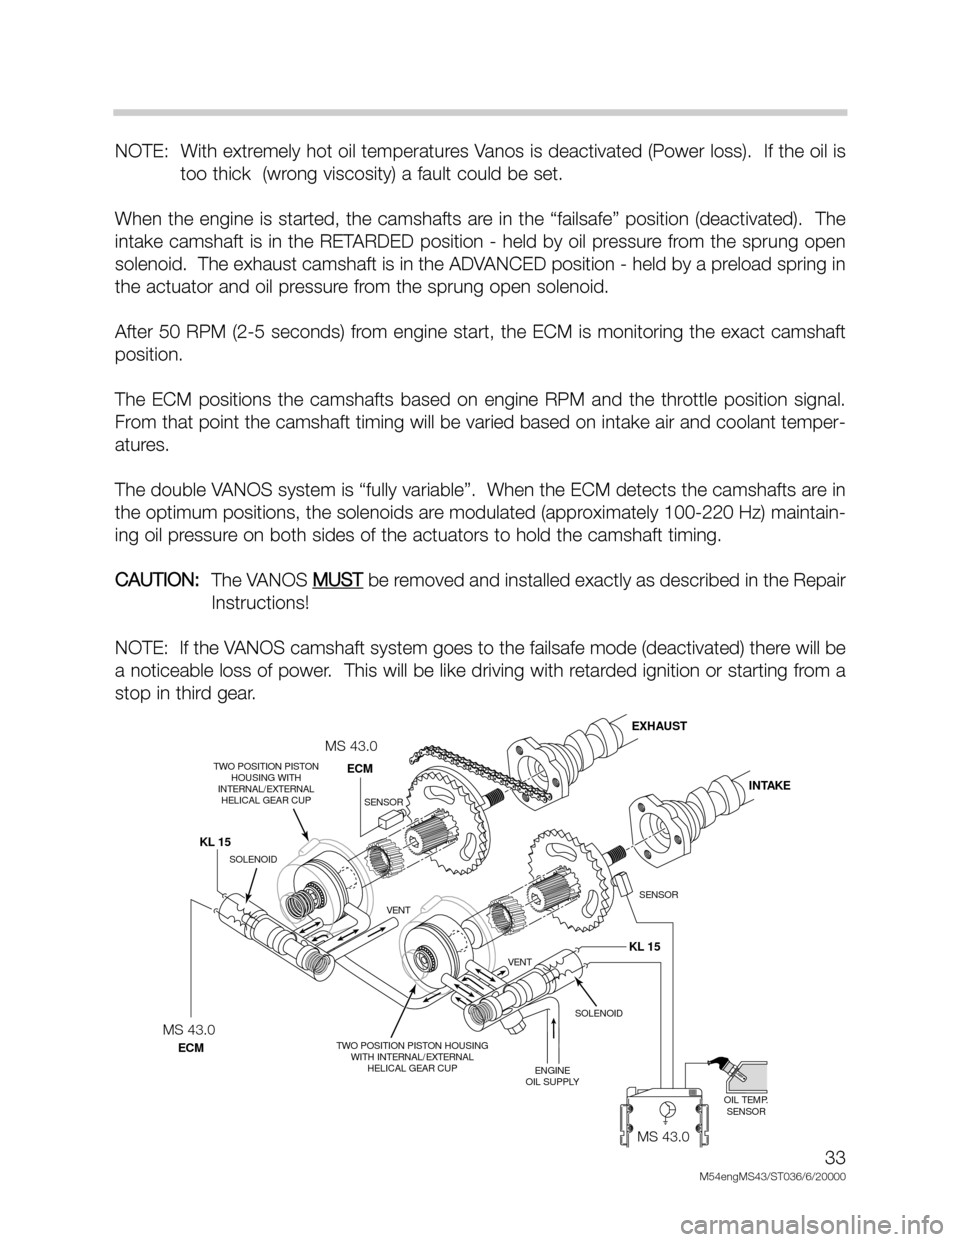 BMW X5 2000 E53 M54 Engine Workshop Manual 33
M54engMS43/ST036/6/20000
NOTE:  With extremely hot oil temperatures Vanos is deactivated (Power loss).  If the oil is
too thick  (wrong viscosity) a fault could be set.
When the engine is started, 